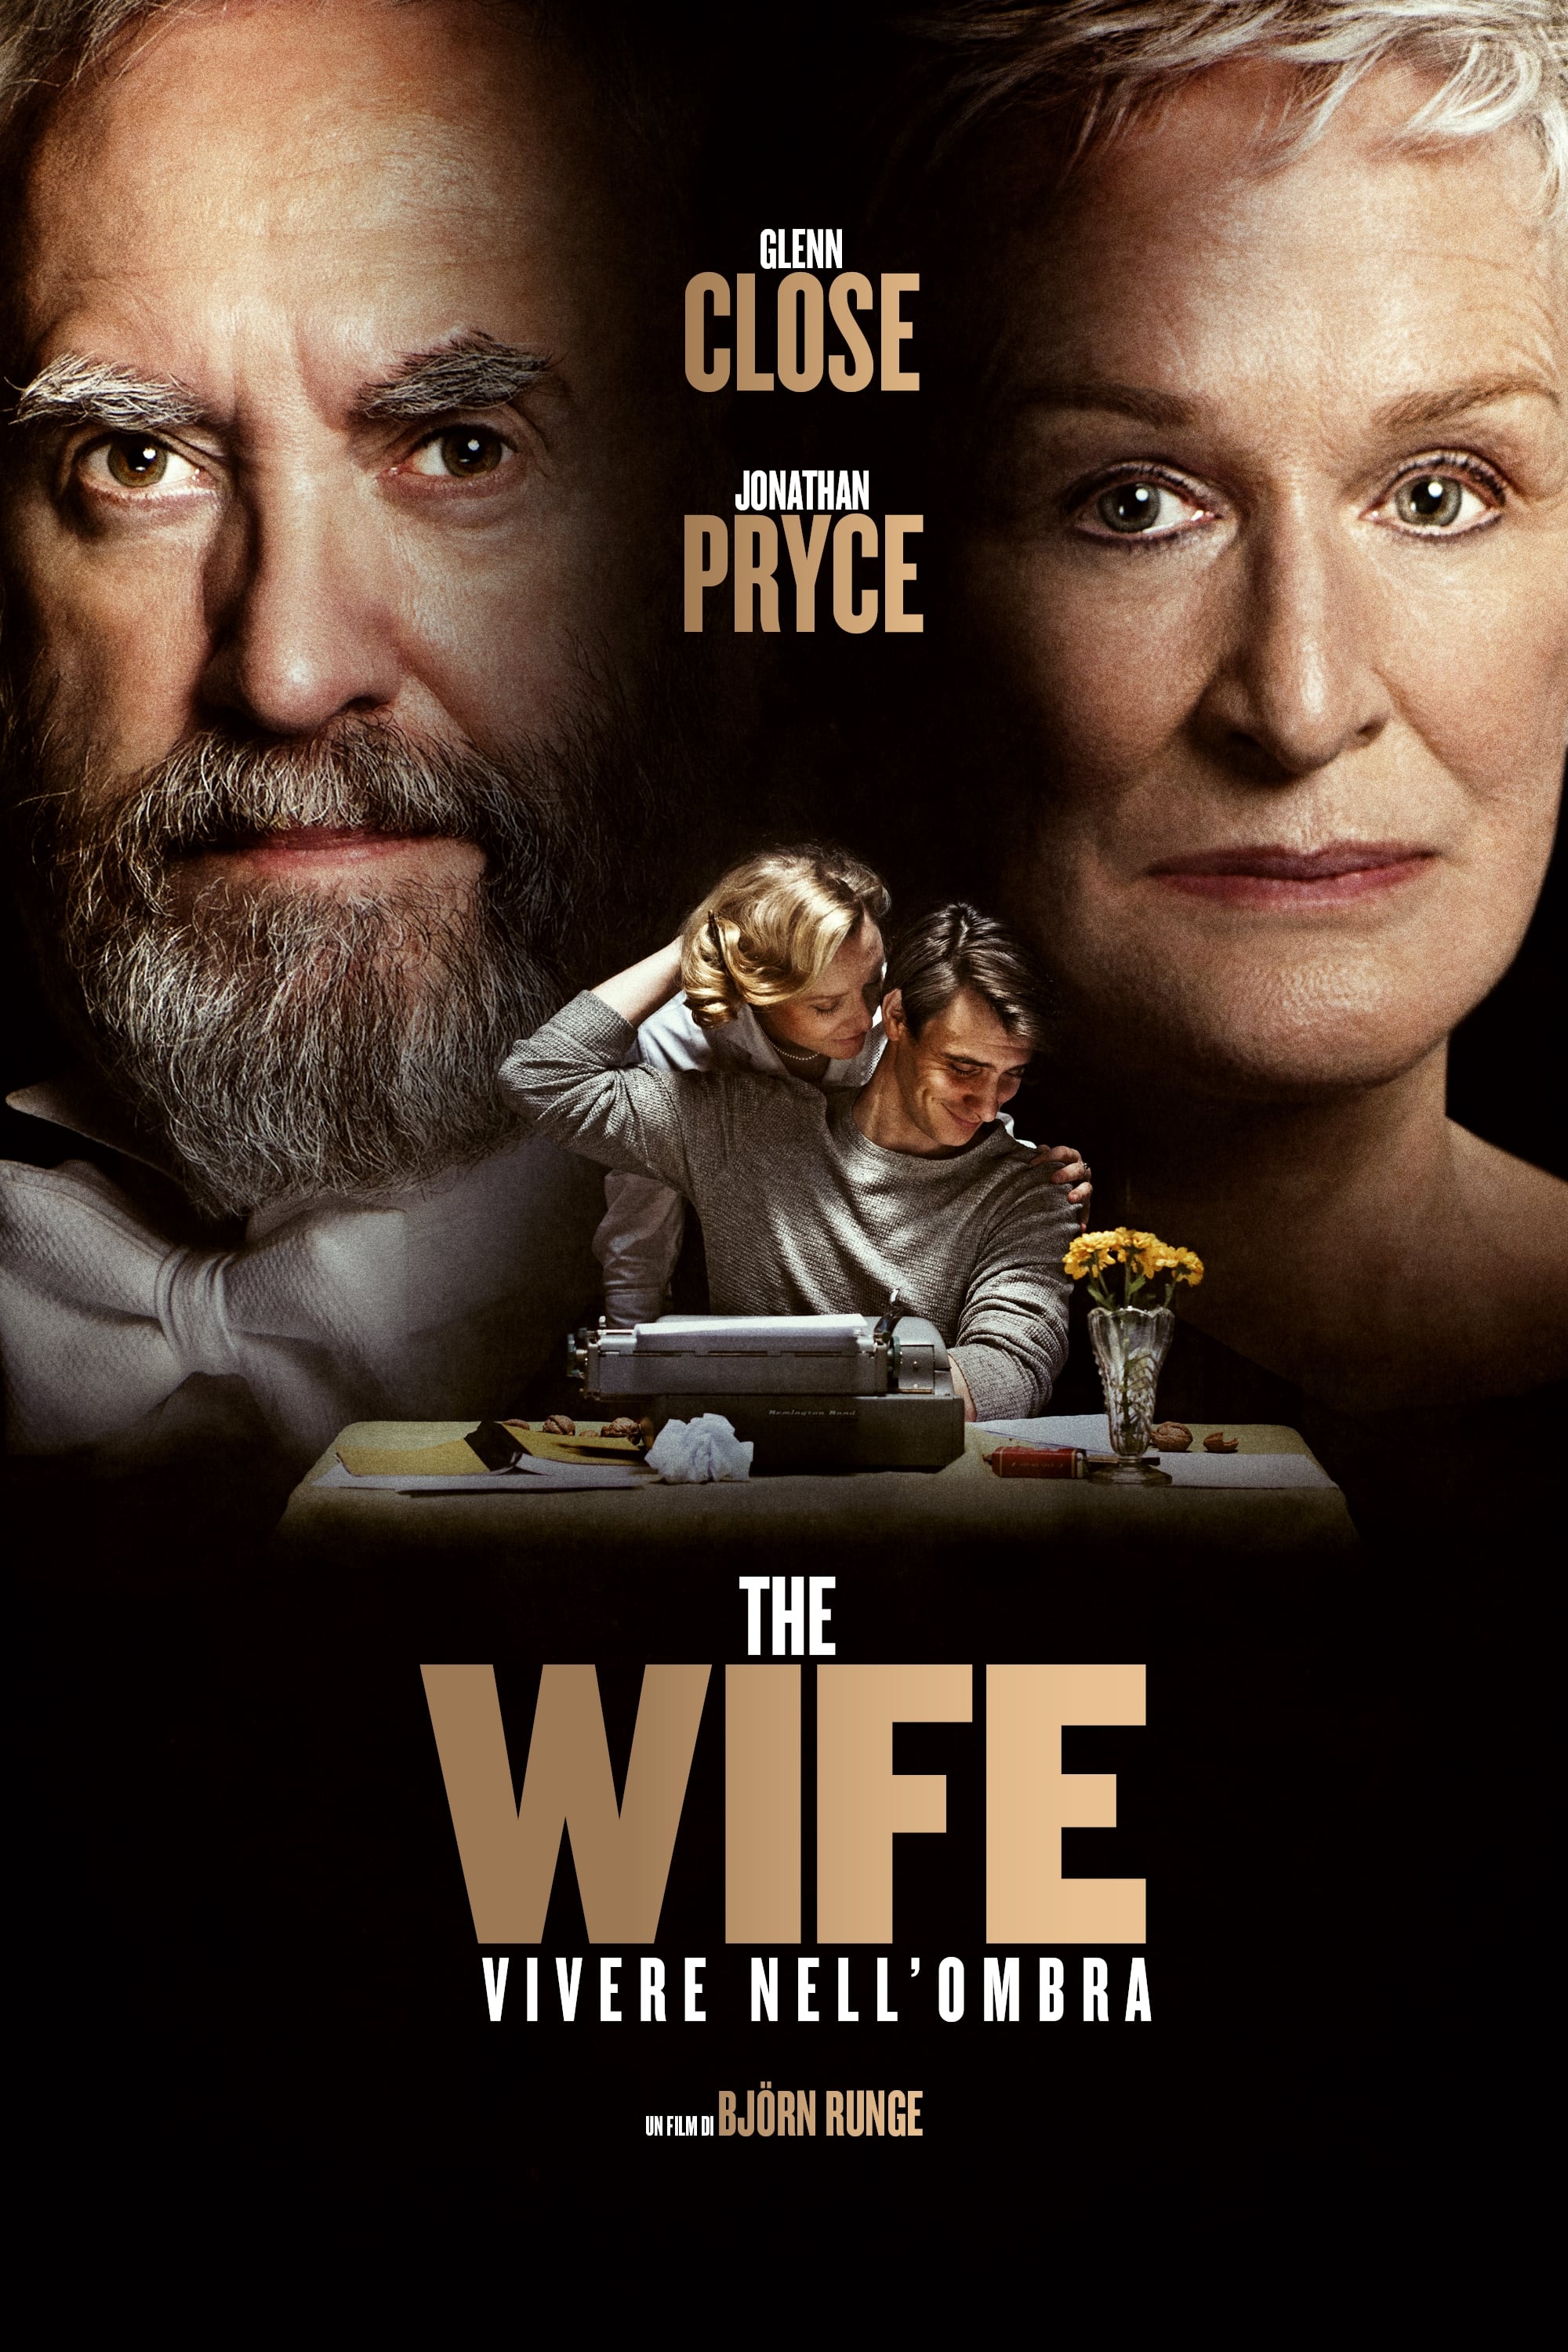 The Wife - Vivere nell'ombra film